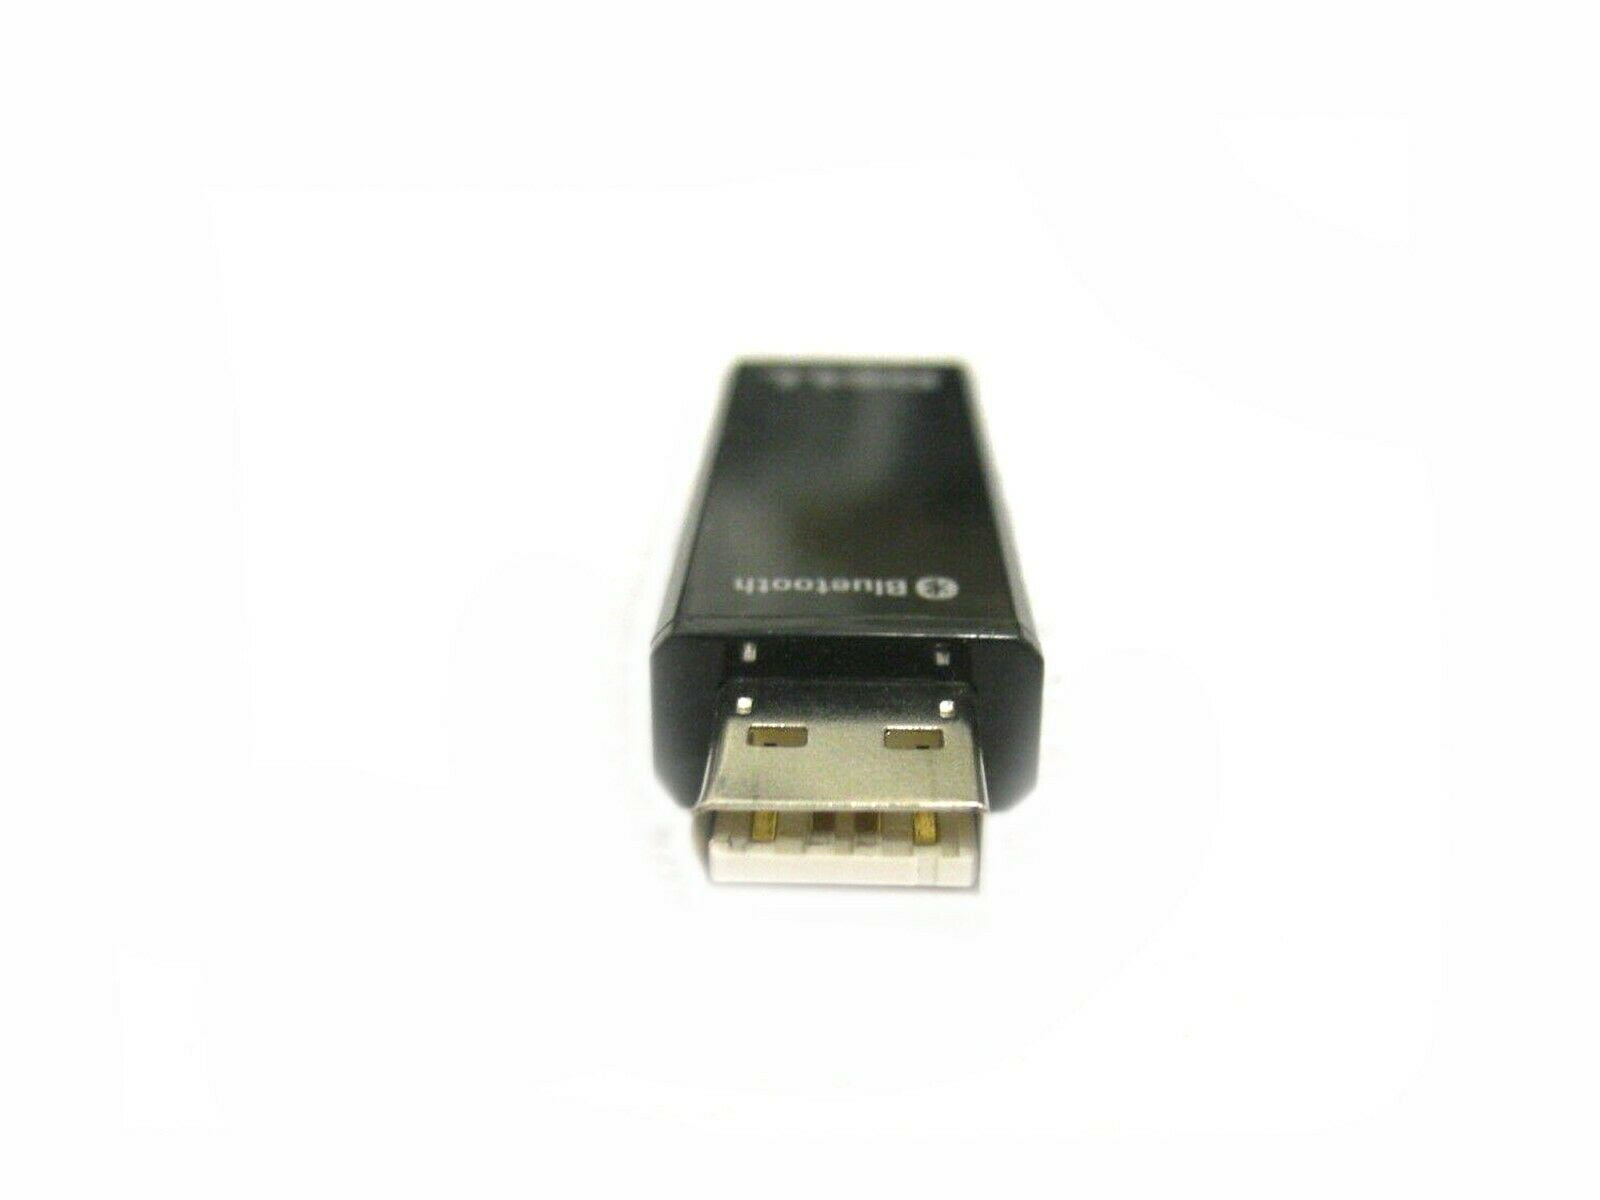 SALE NEW Dell C-UV35 USB Wireless Bluetooth Receiver Dongle DR985 820-000442 